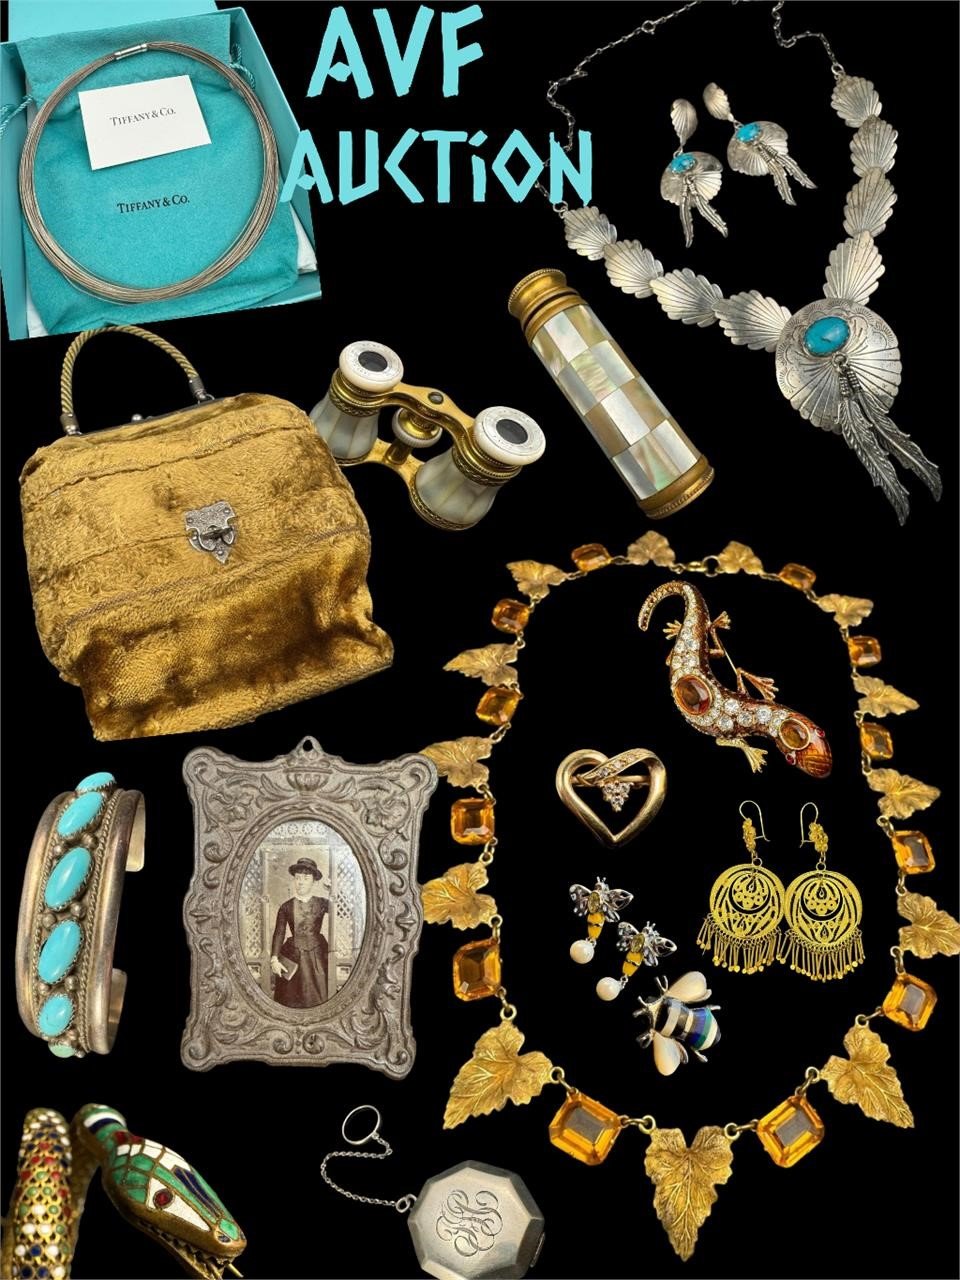 All the vintage/antique jewelry you could want in one place